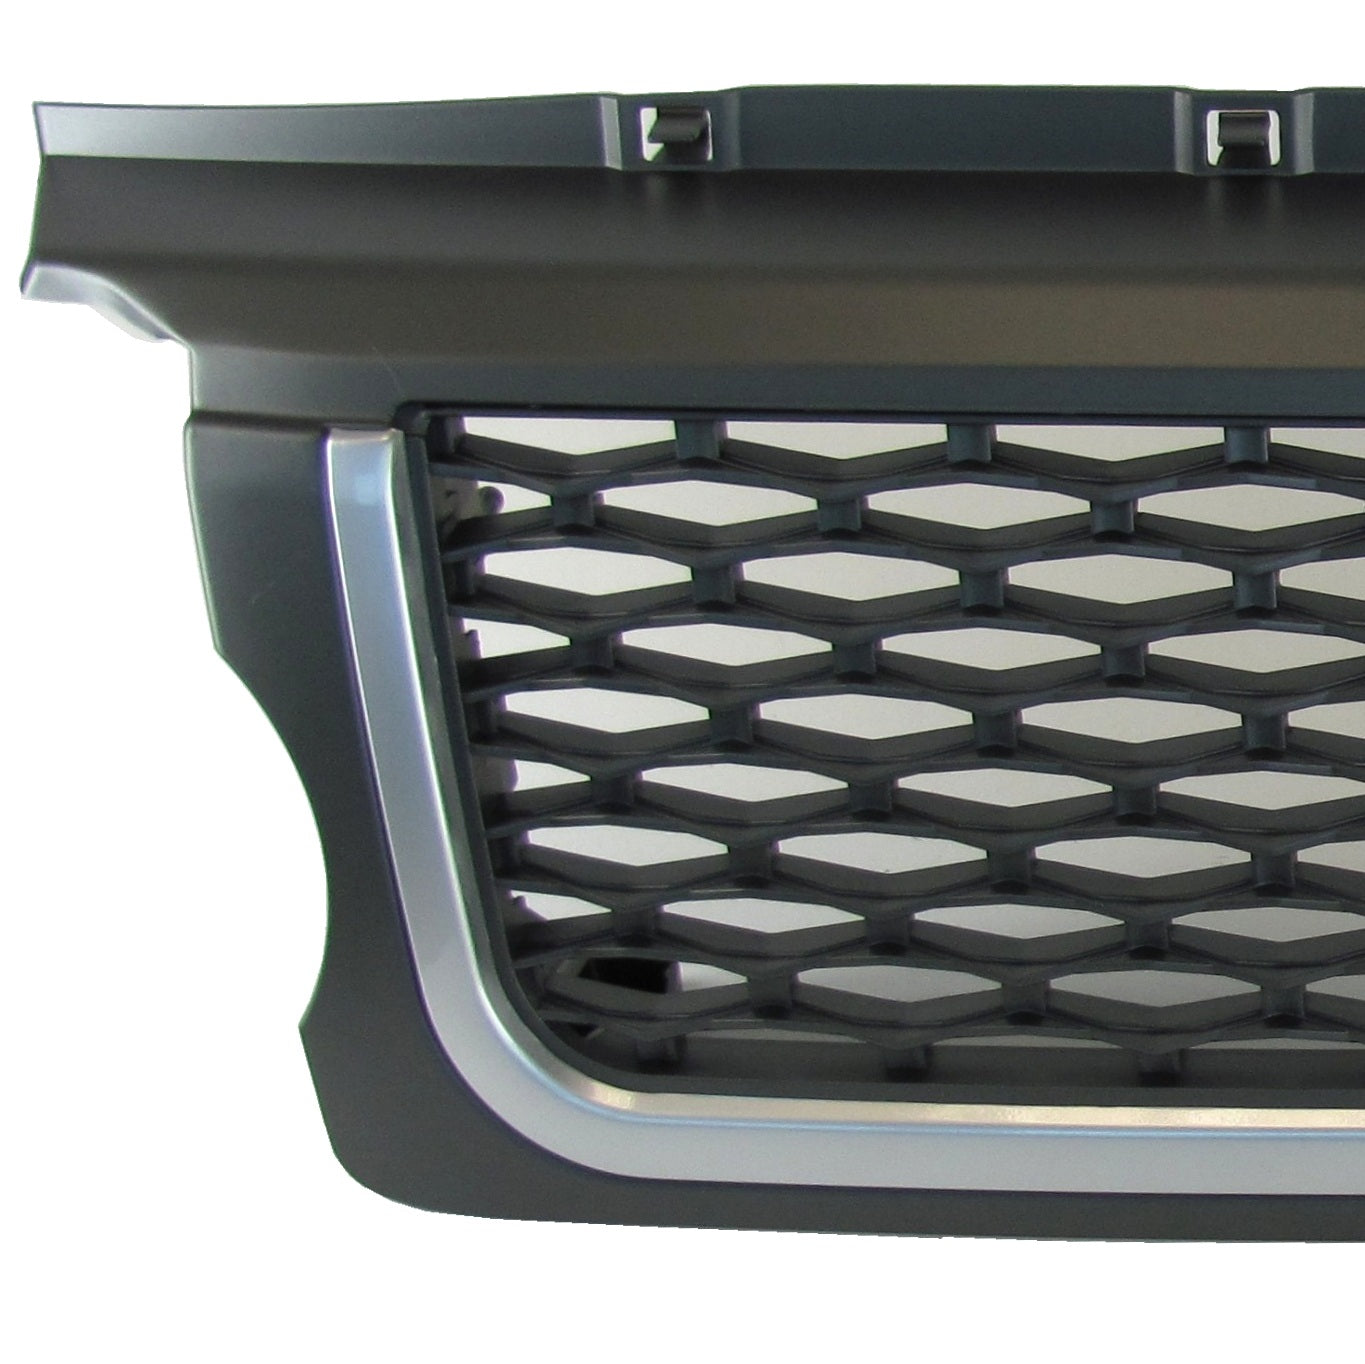 Front Grille - Grey/Silver/Grey for Range Rover Sport 05-09